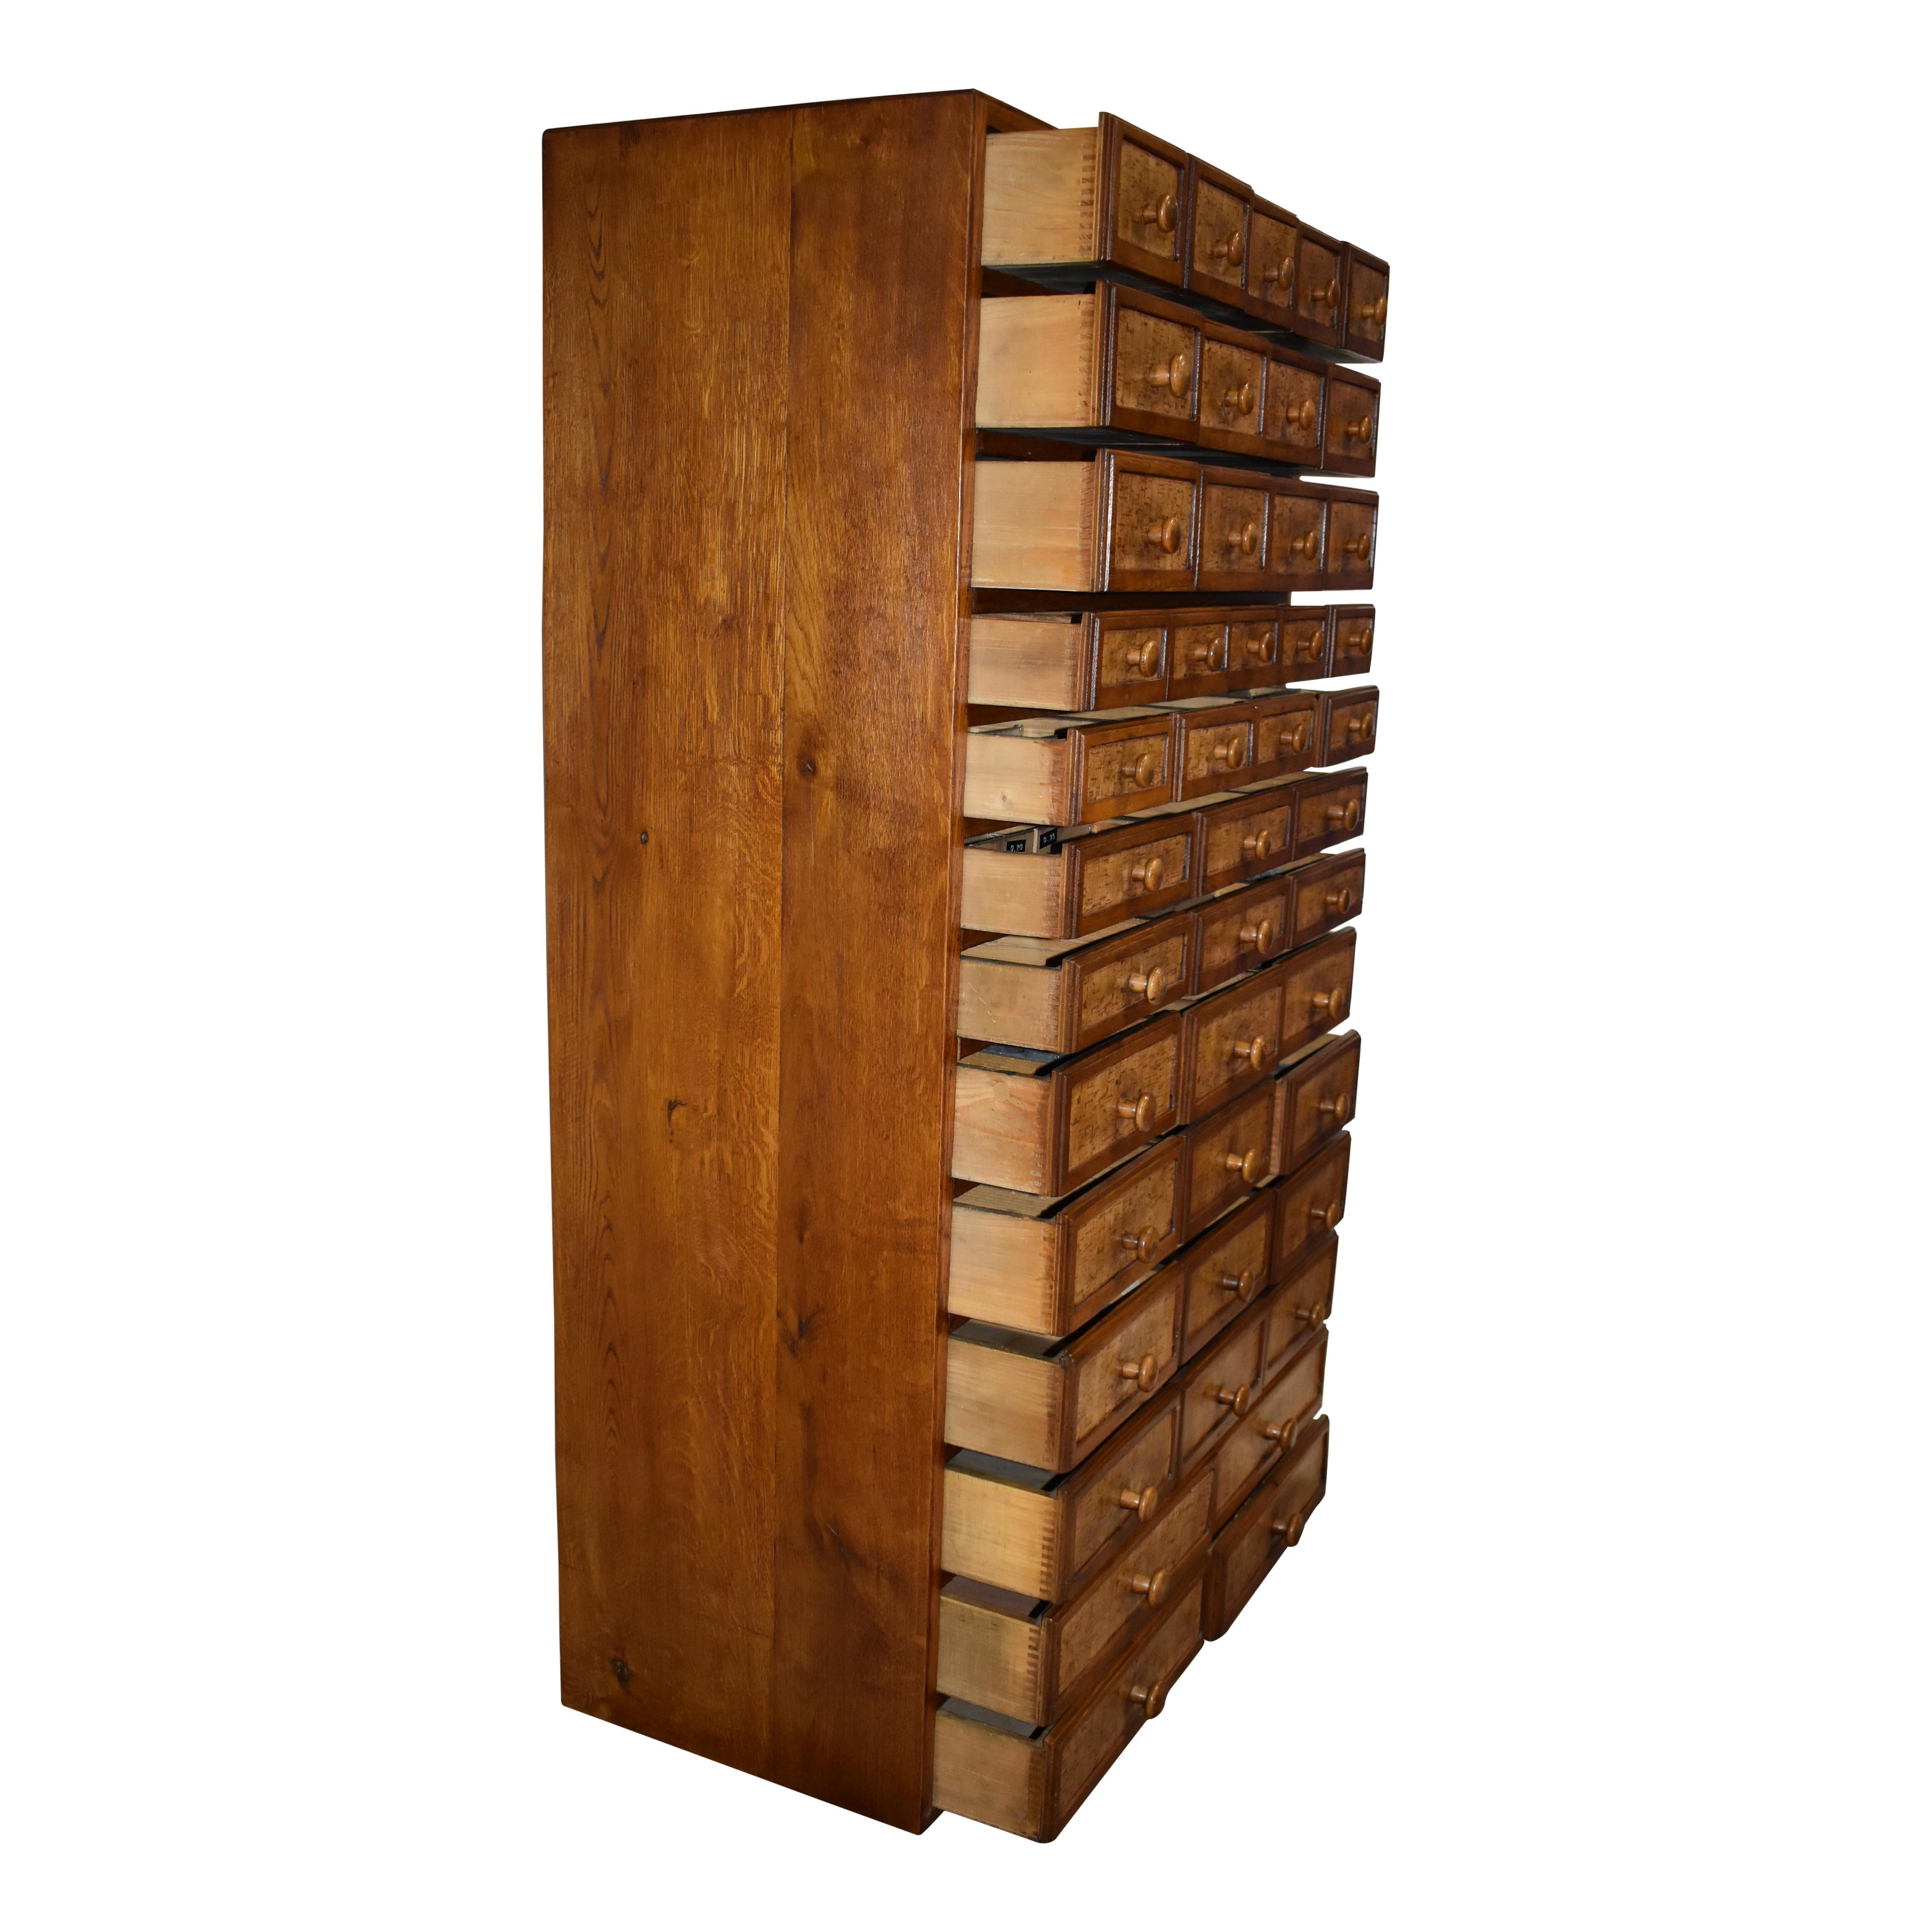 Featuring 44 dovetailed drawers of various sizes with wooden knob pulls, this oak cabinet was once used for cataloging auto information and small parts.
 